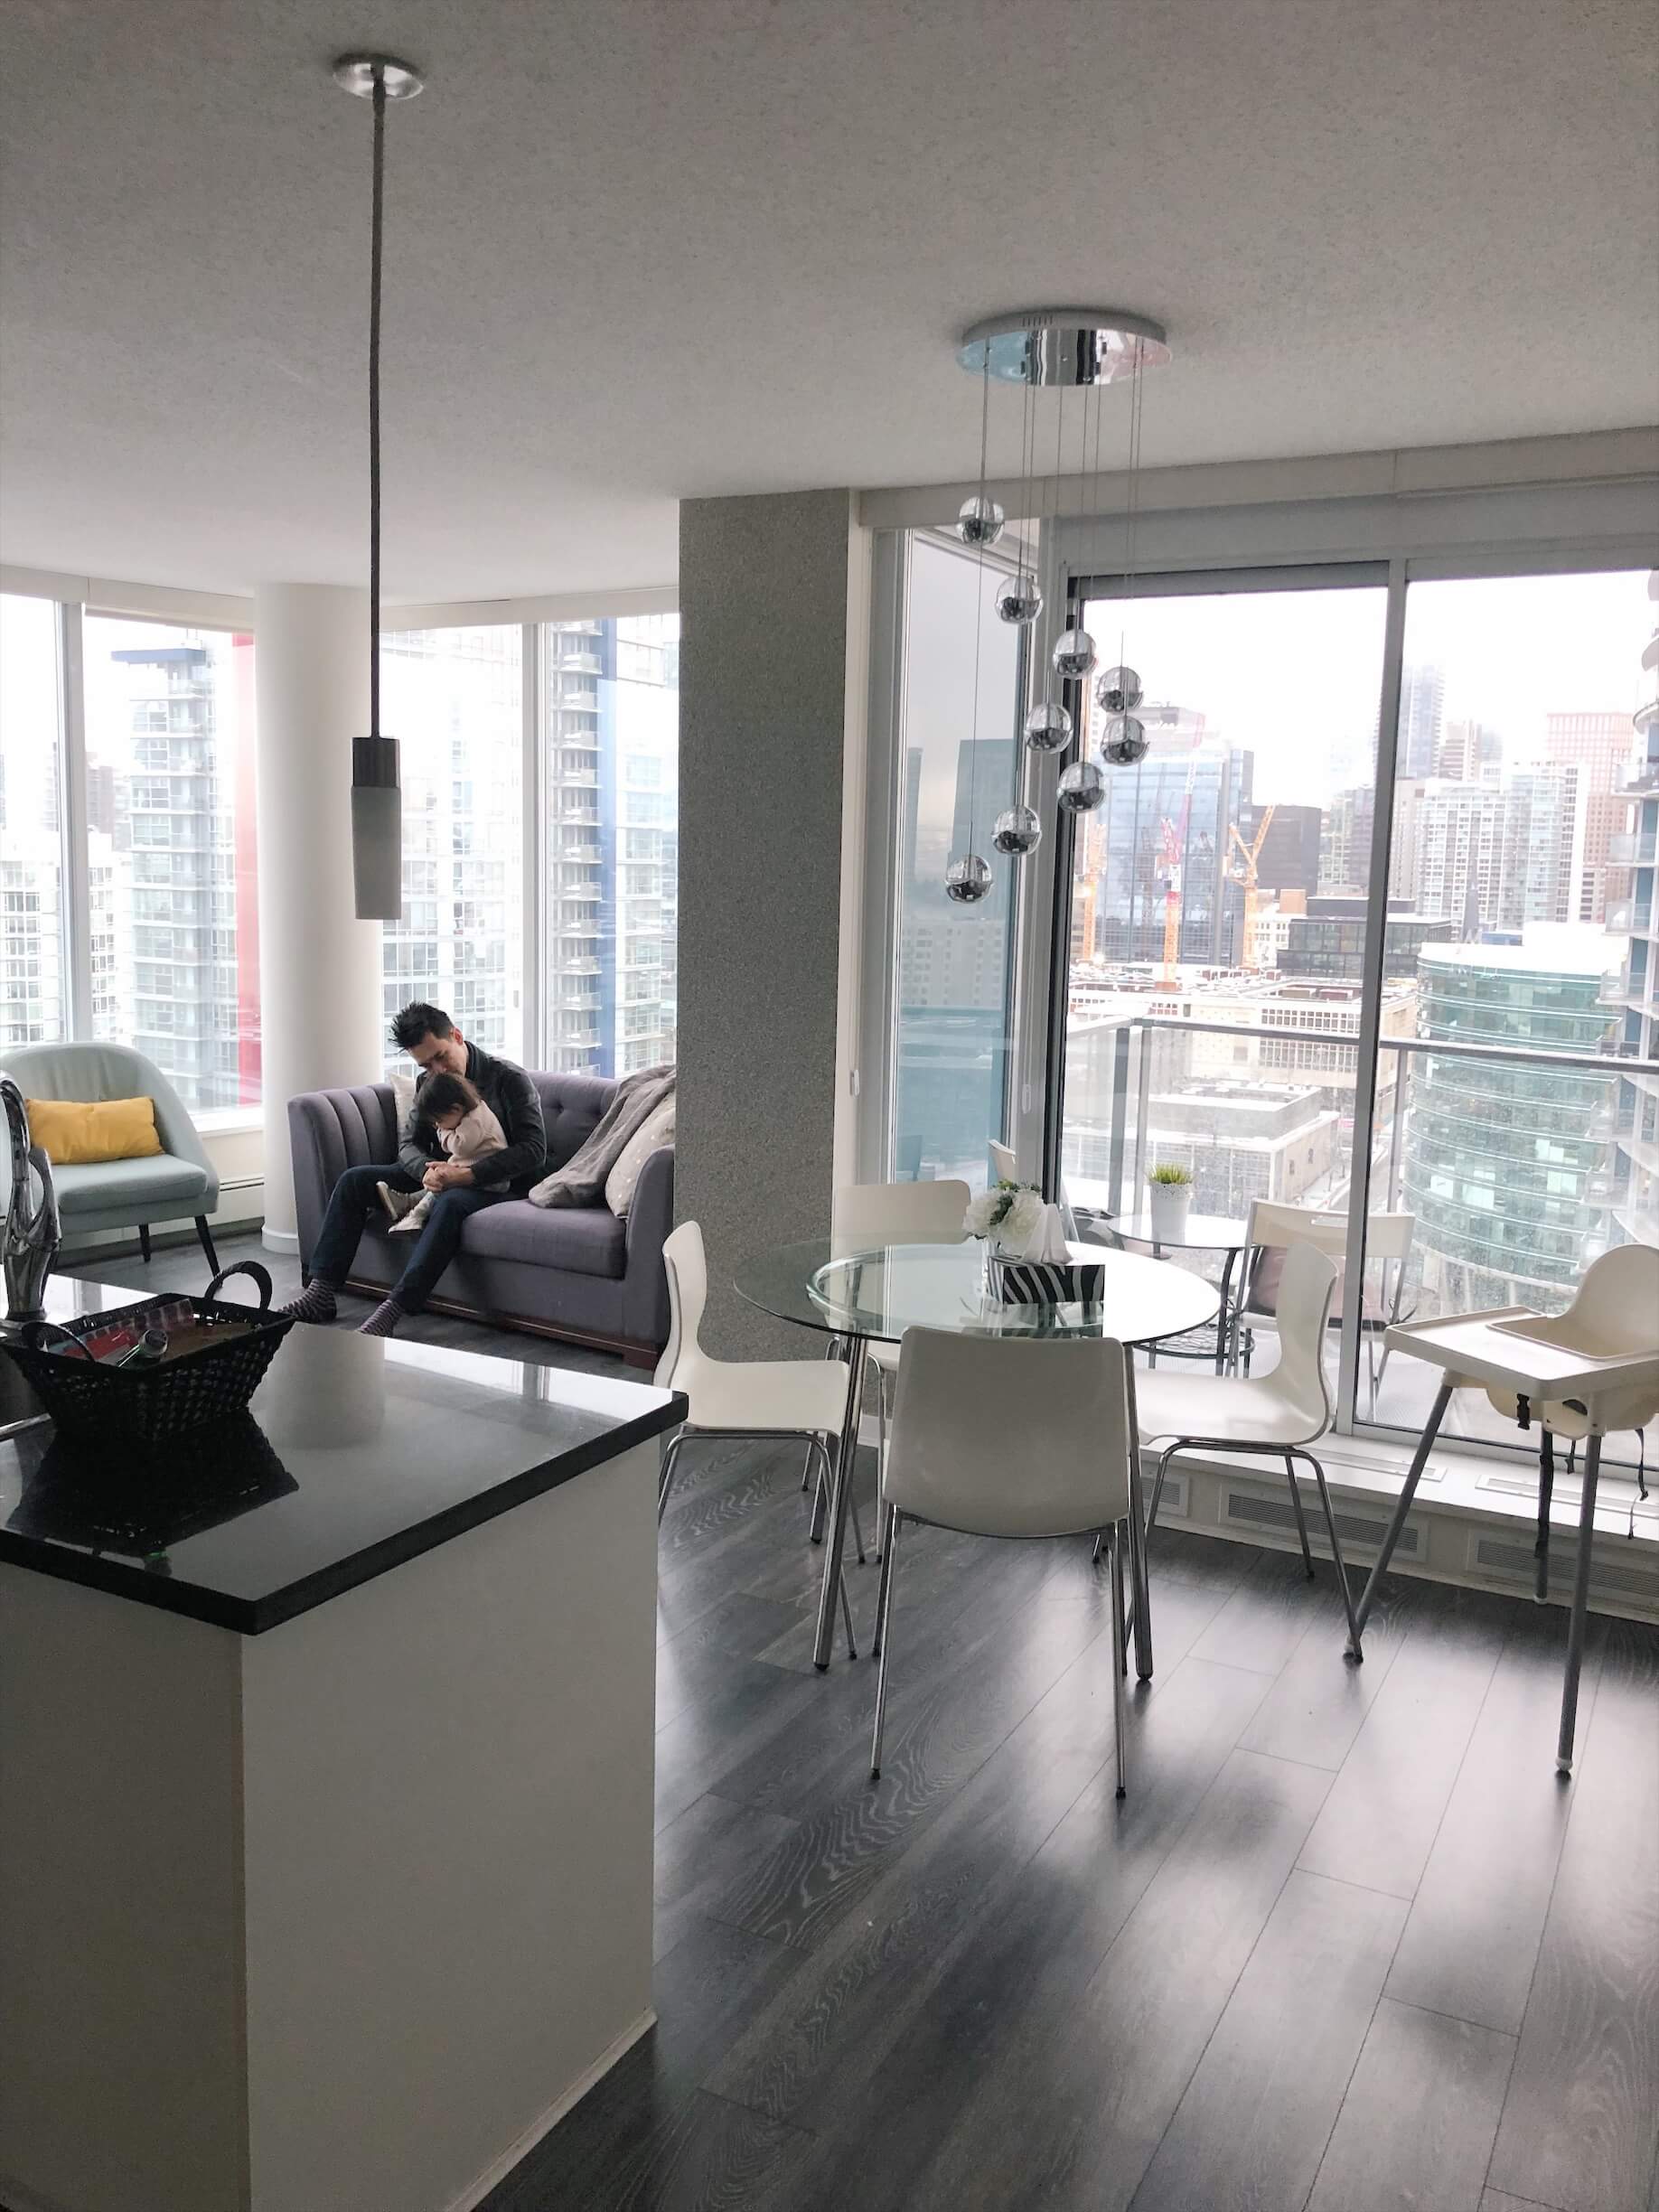 Vancouver baby friendly airbnb rental